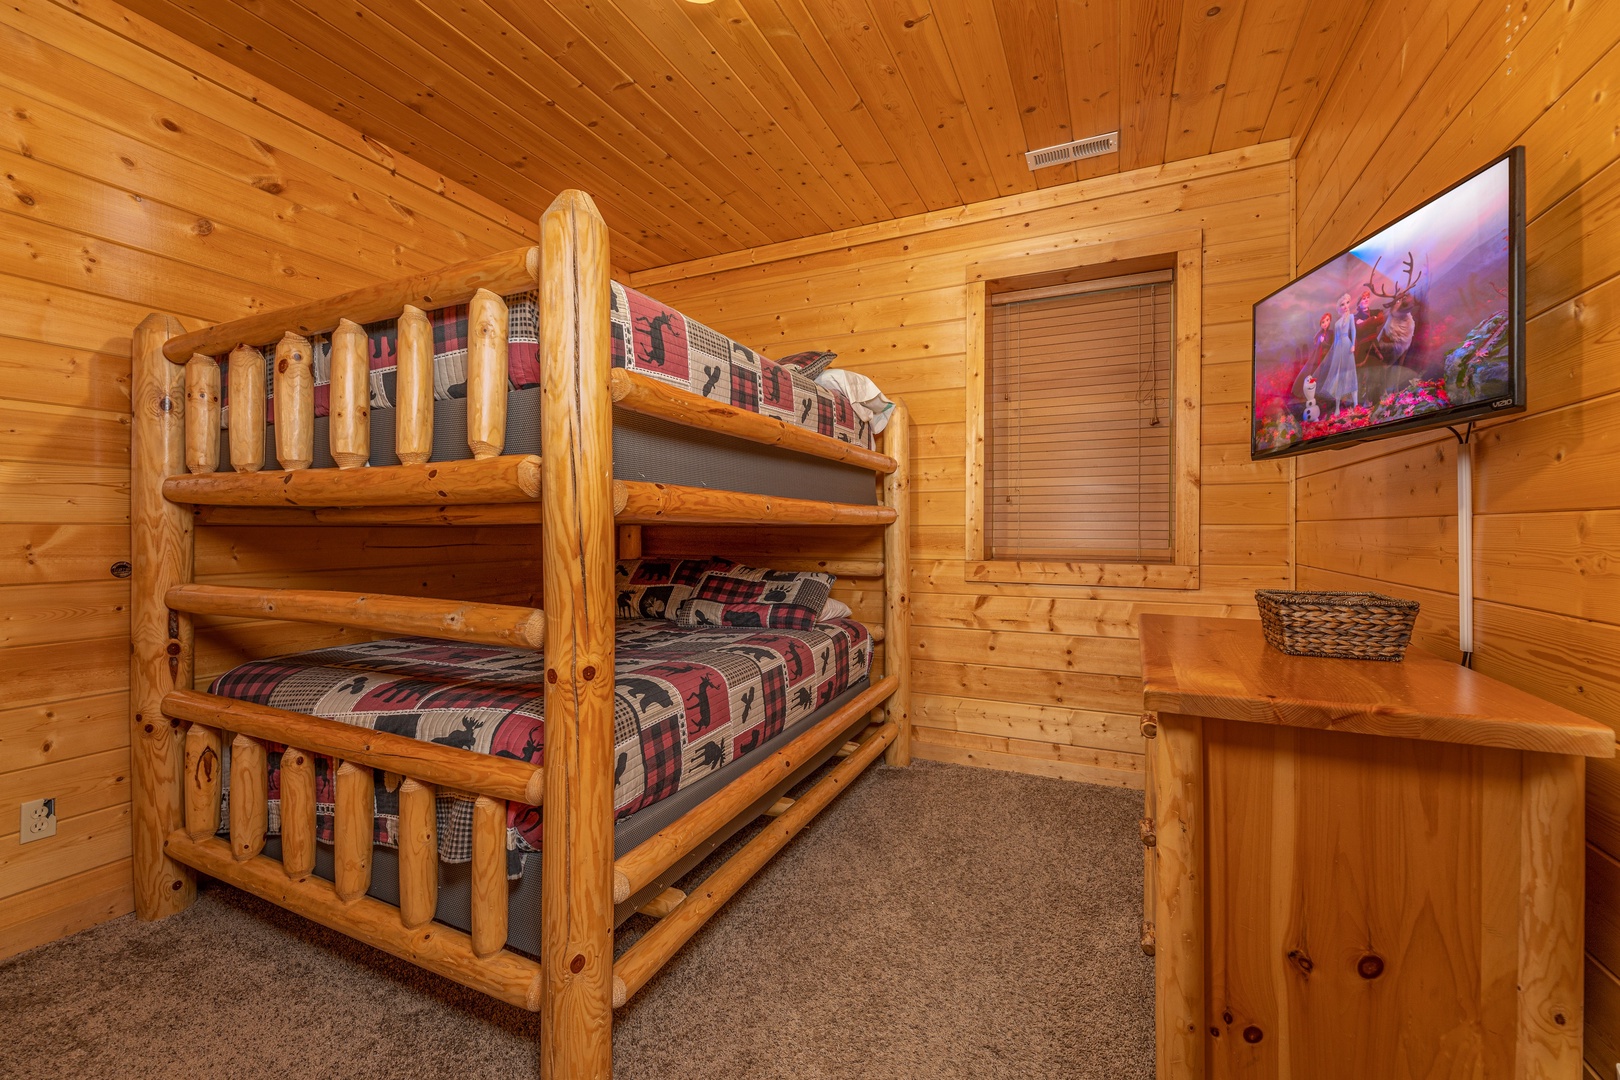 Bunk beds, dresser, and TV in a bedroom at Grizzly's Den, a 5 bedroom cabin rental located in Gatlinburg